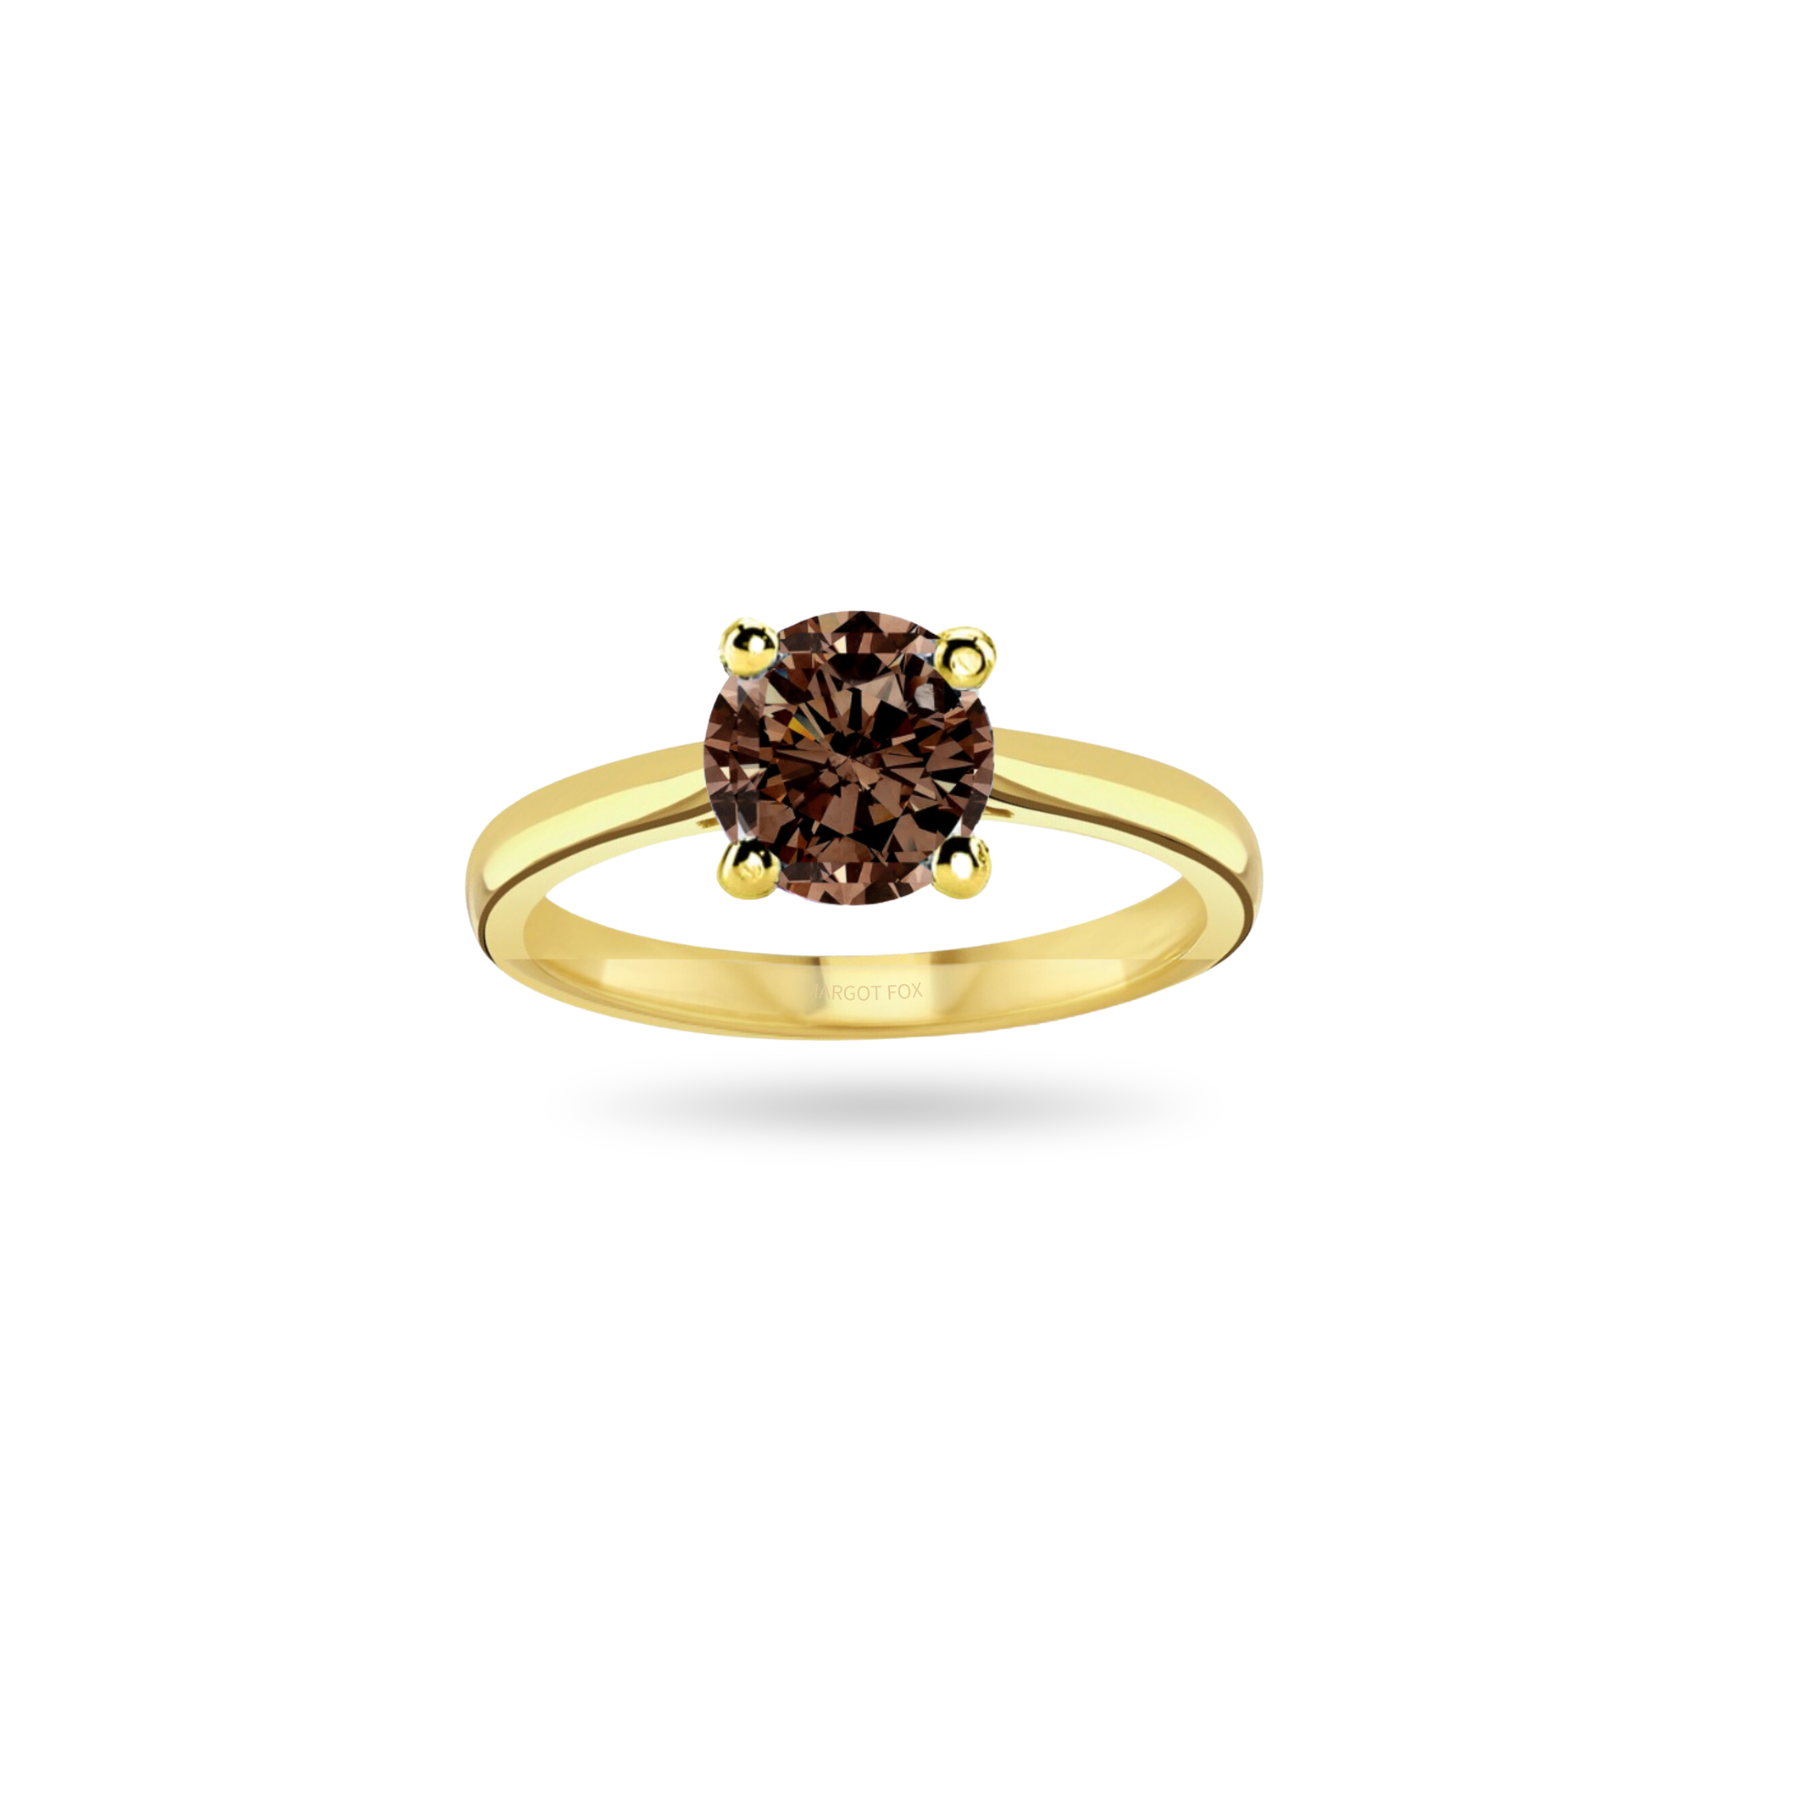 Forever Classic 1ct Brown Diamond Solitaire 18ct Gold Ring